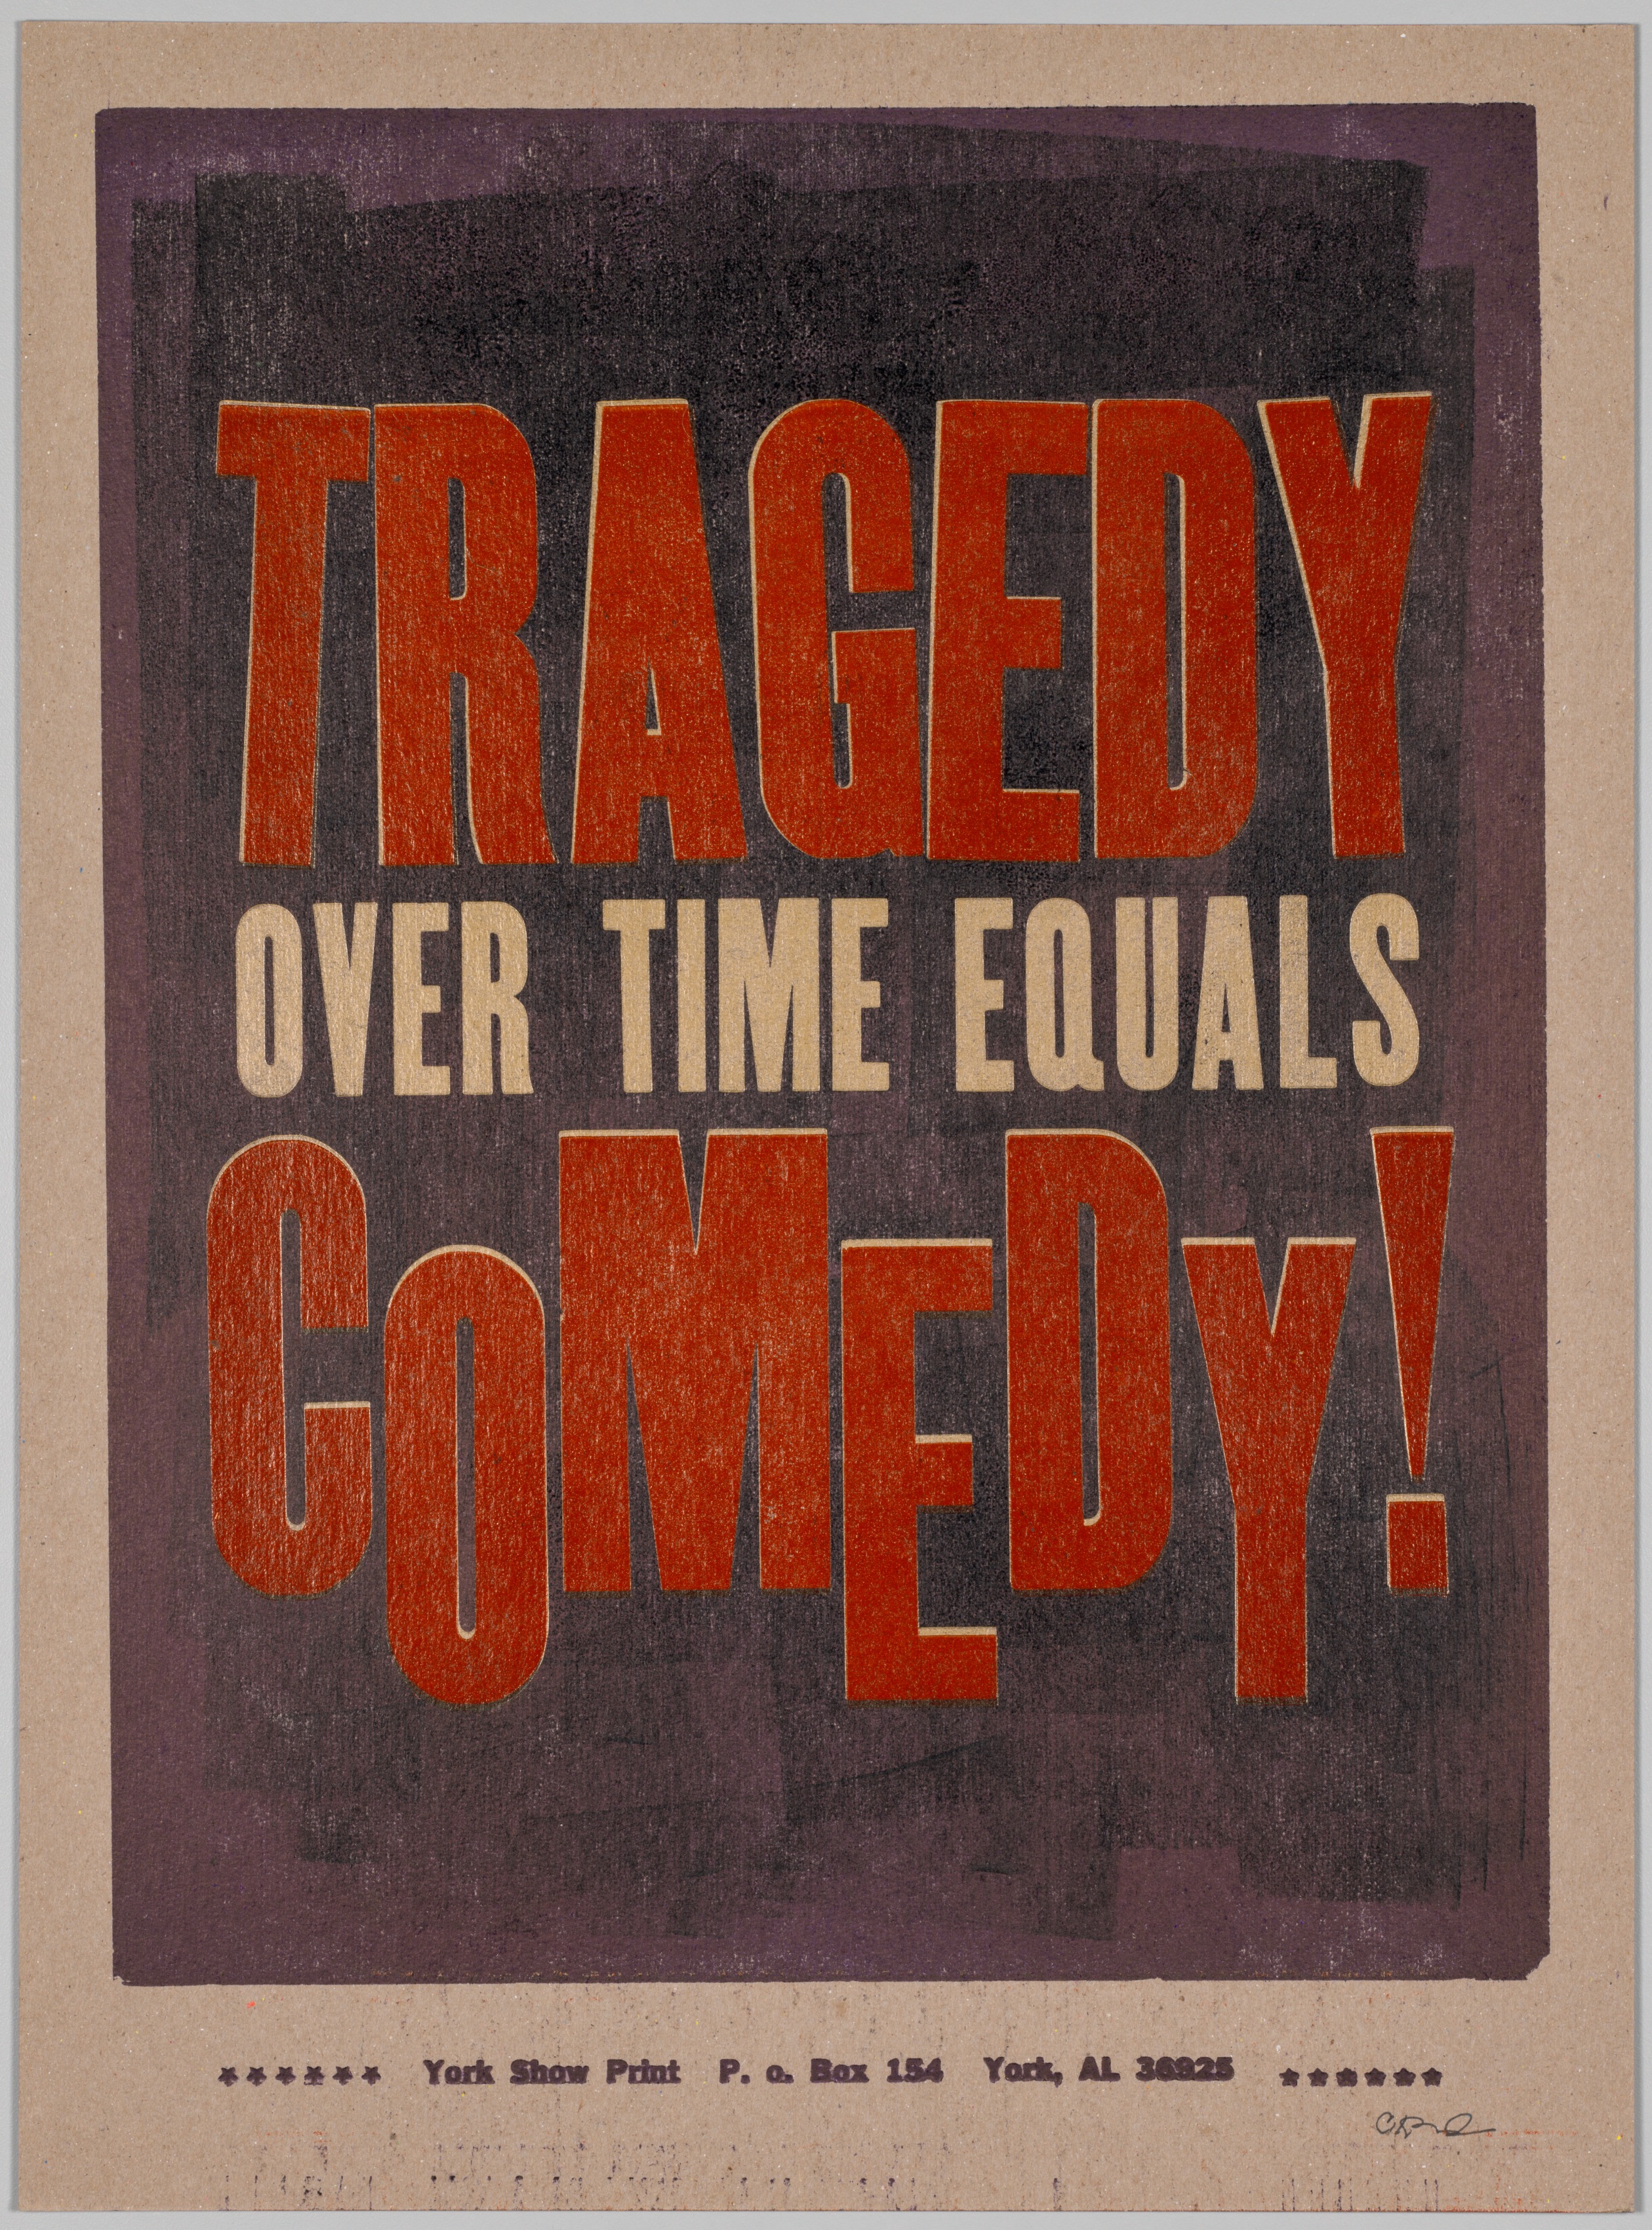 The Bad Air Smelled of Roses: Tragedy Over Time Equals Comedy!